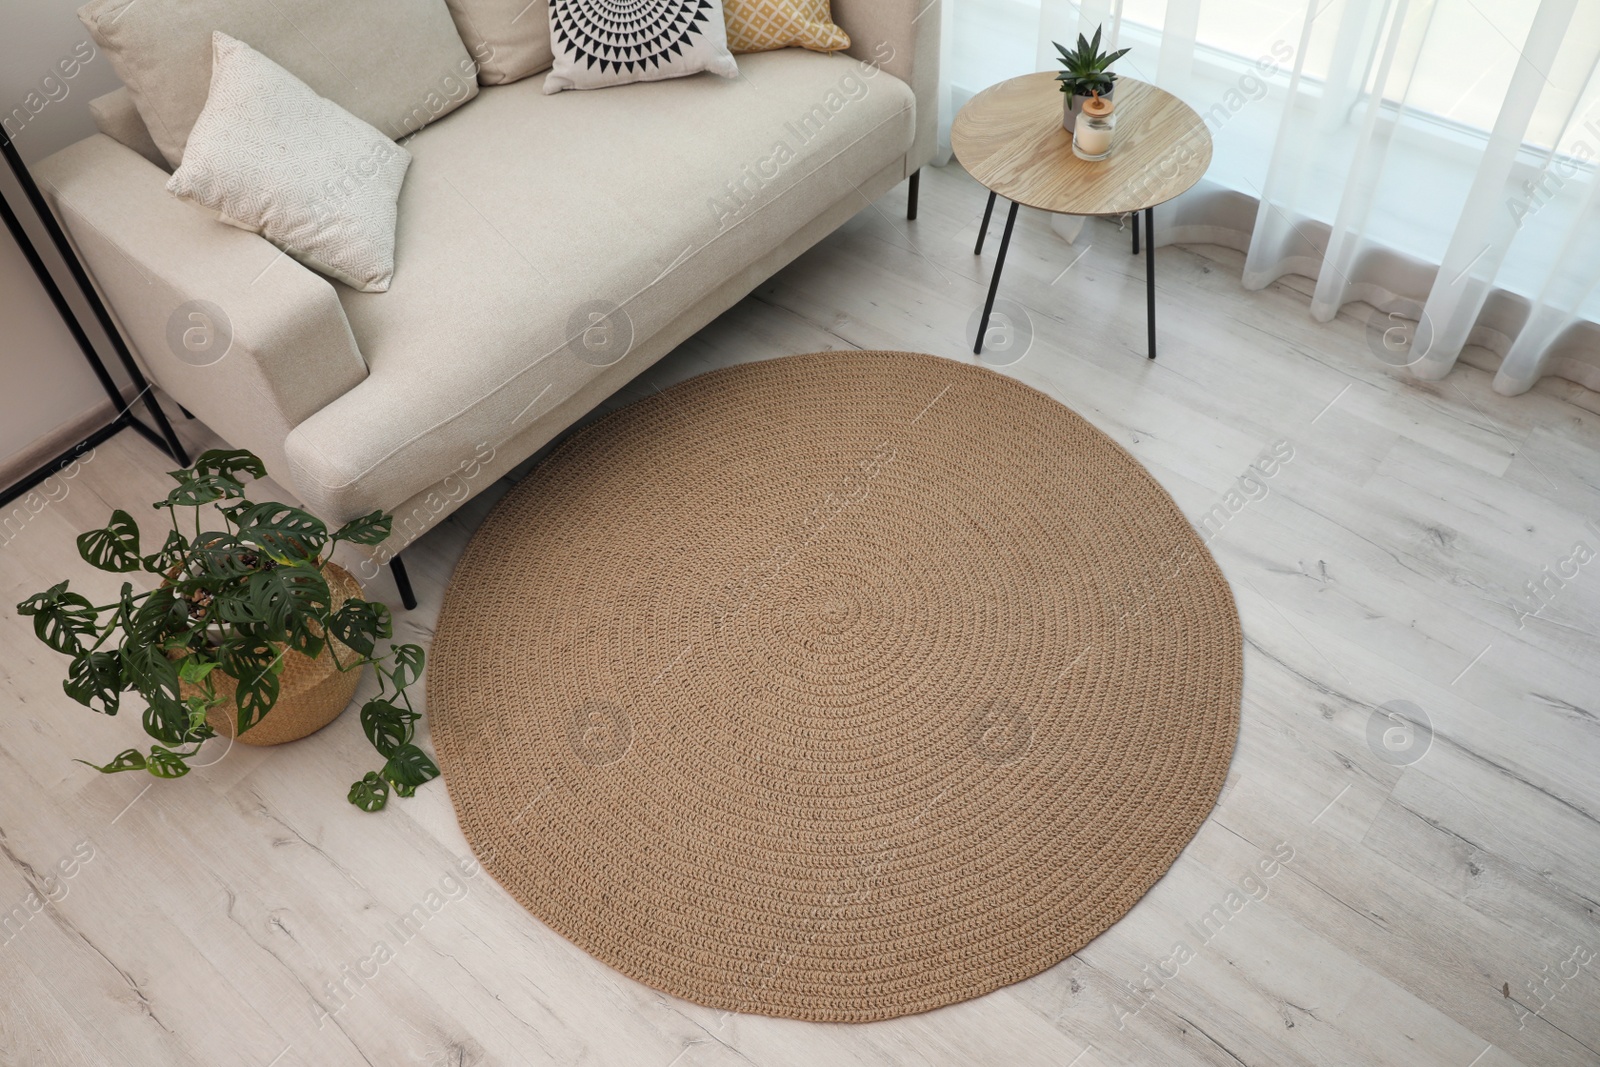 Photo of Living room interior with comfortable sofa and stylish round rug, above view